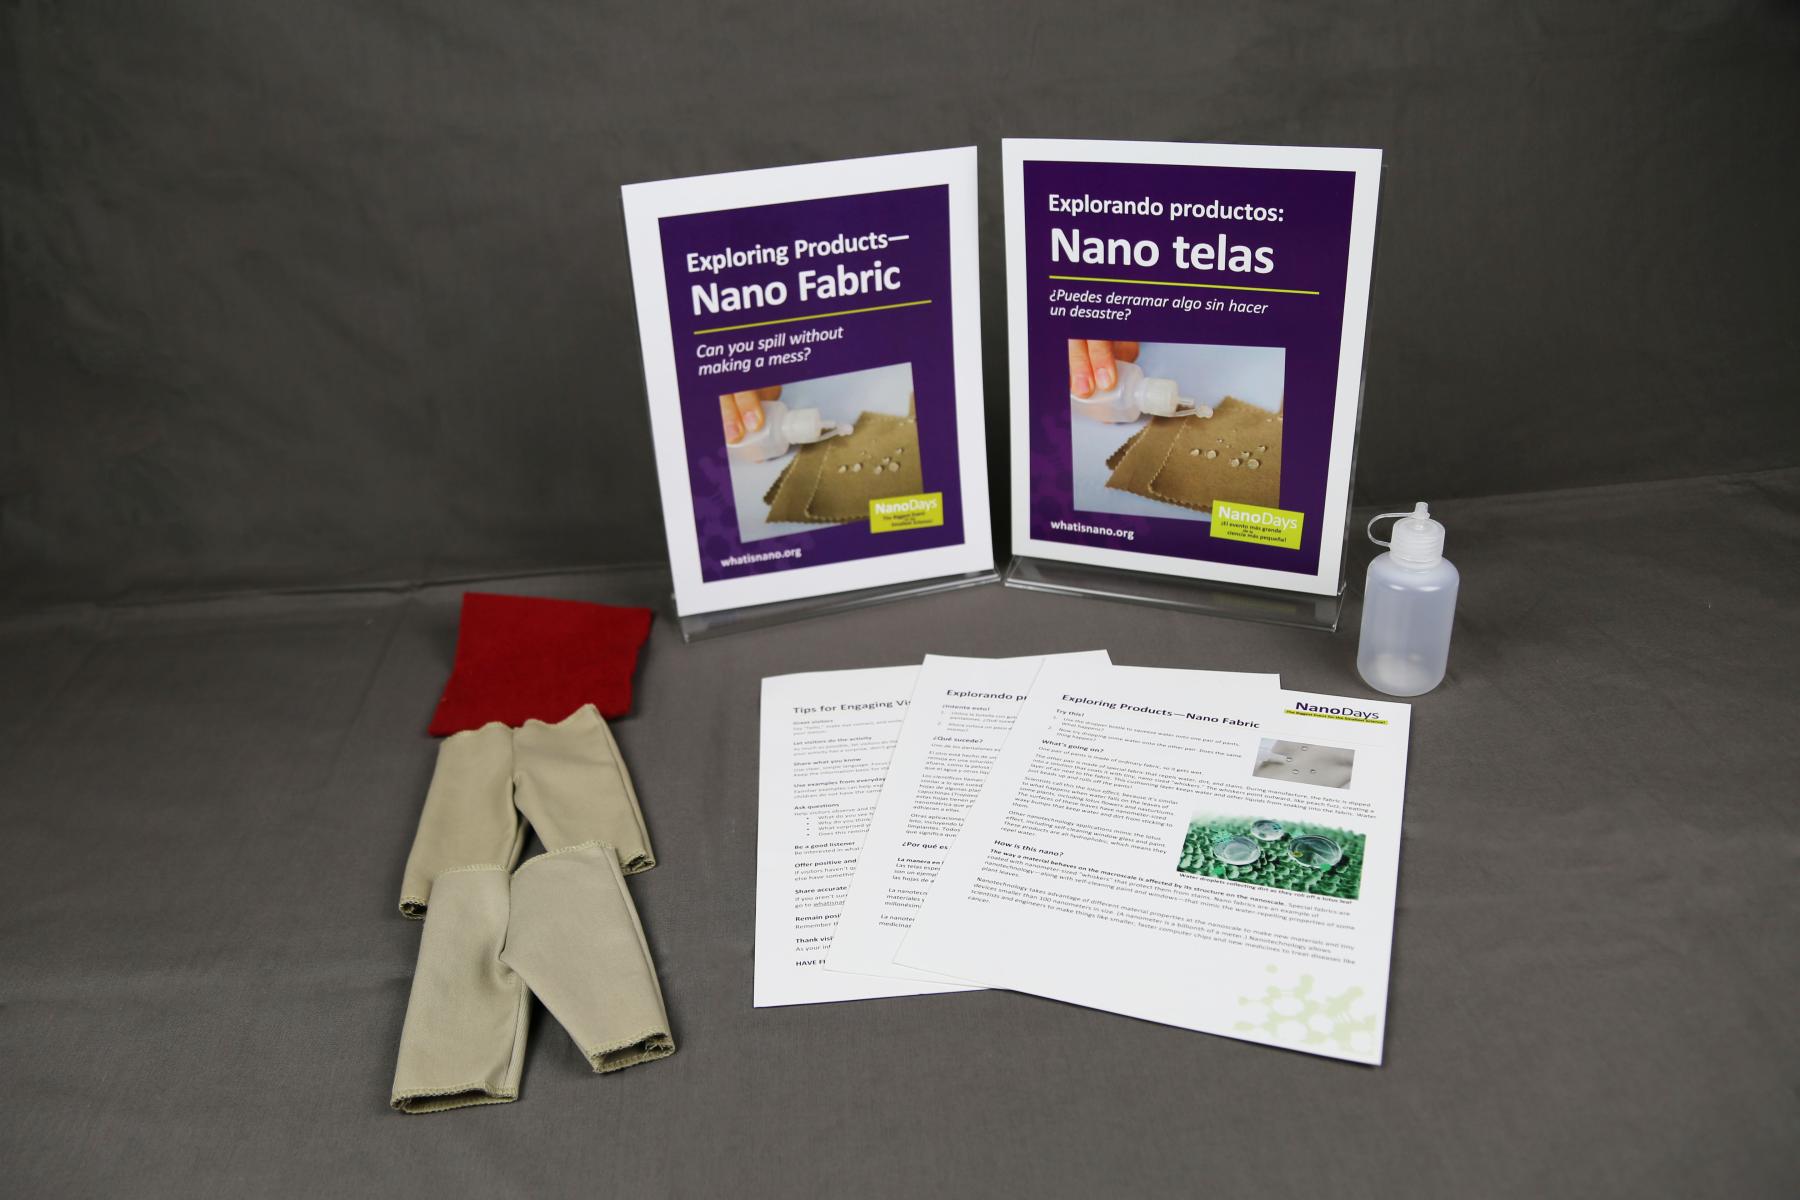 Exploring Products - Nano Fabrics acitivty components including signs, guides, and mini pants coated with nano materials